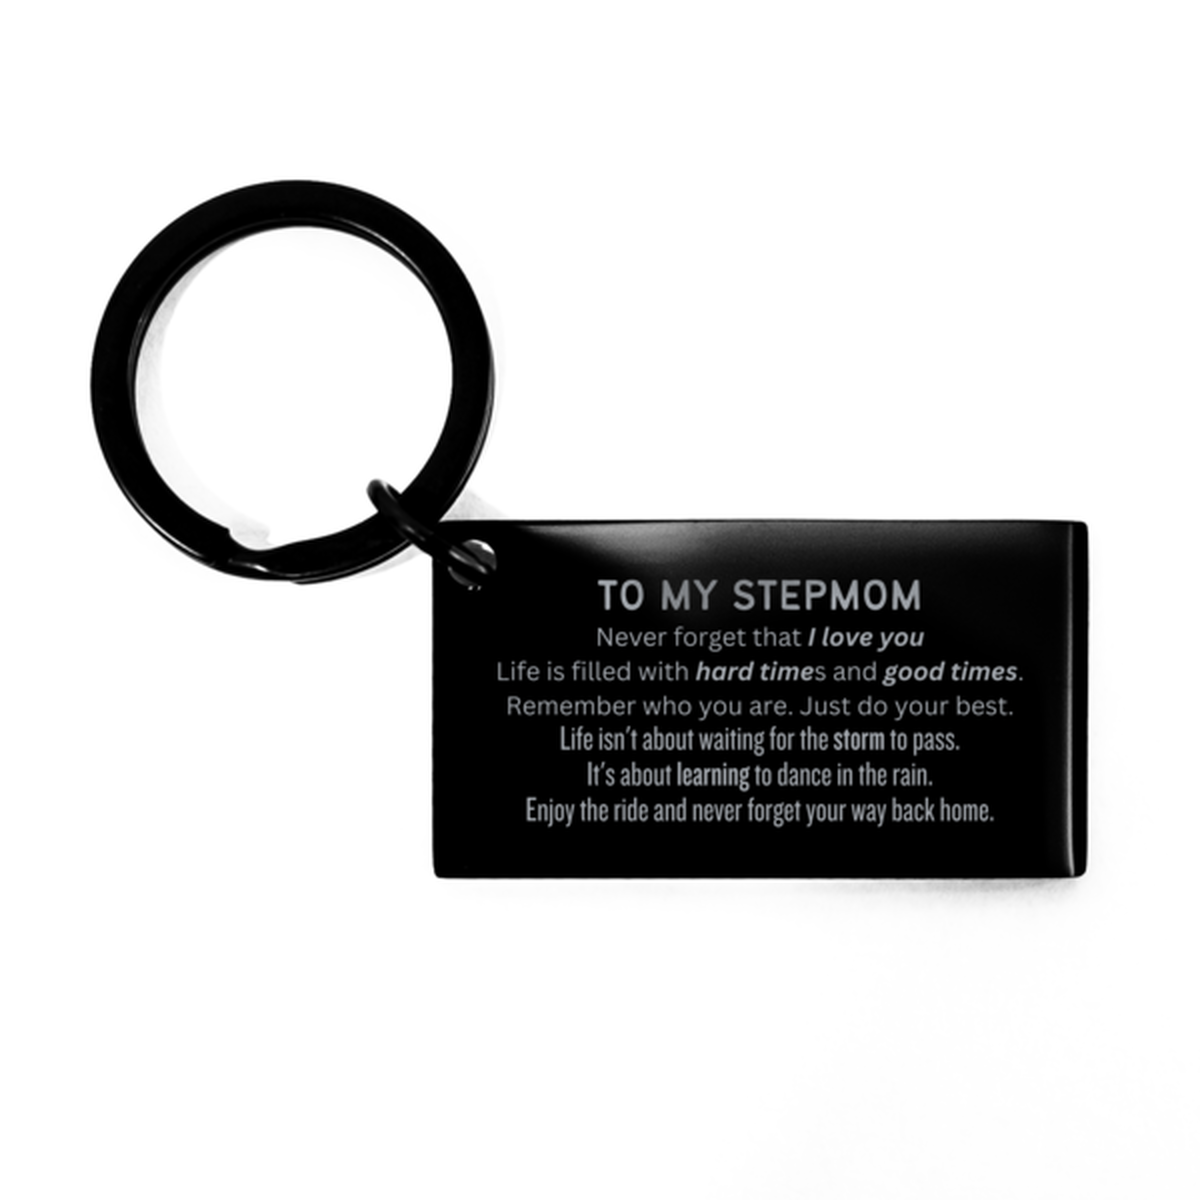 Christmas Stepmom Keychain Gifts, To My Stepmom Birthday Thank You Gifts For Stepmom, Graduation Unique Gifts For Stepmom To My Stepmom Never forget that I love you life is filled with hard times and good times. Remember who you are. Just do your best